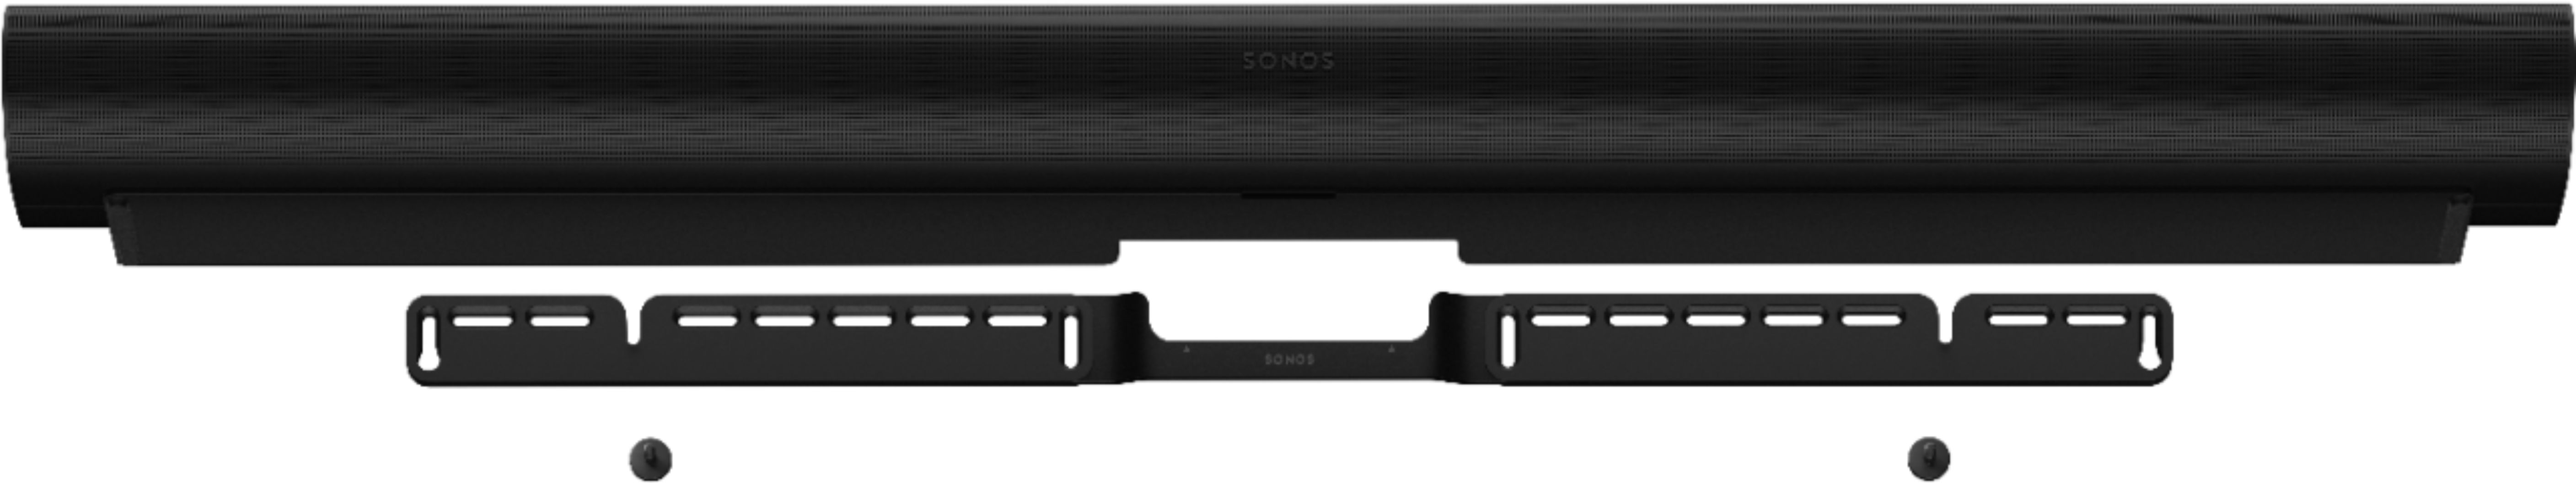 Angle View: Sonos - Wall Mount for Arc - Black